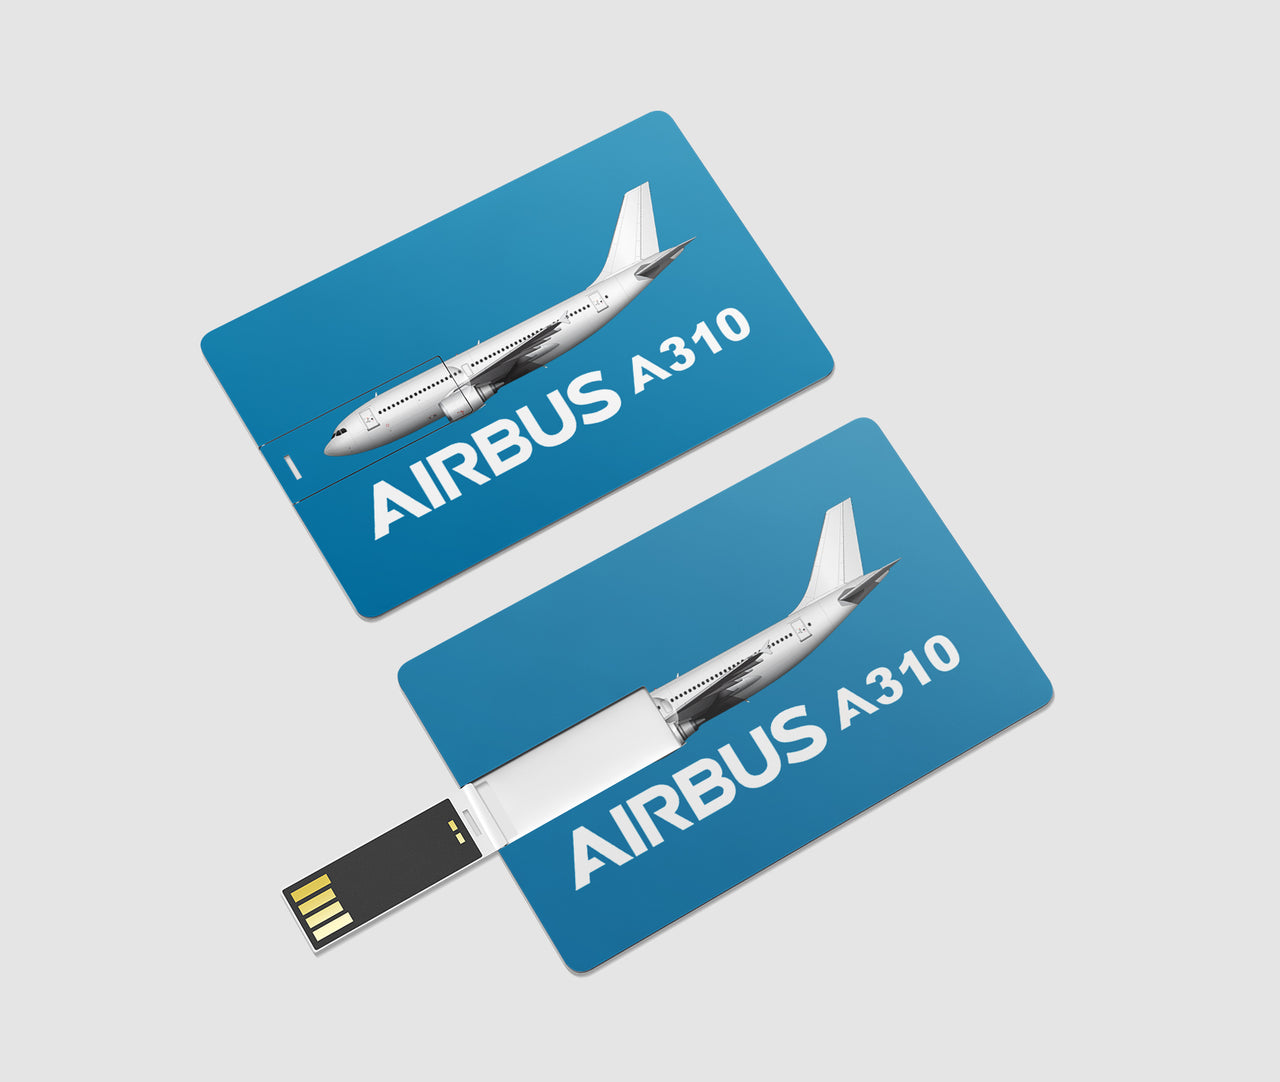 The Airbus A310 Designed USB Cards